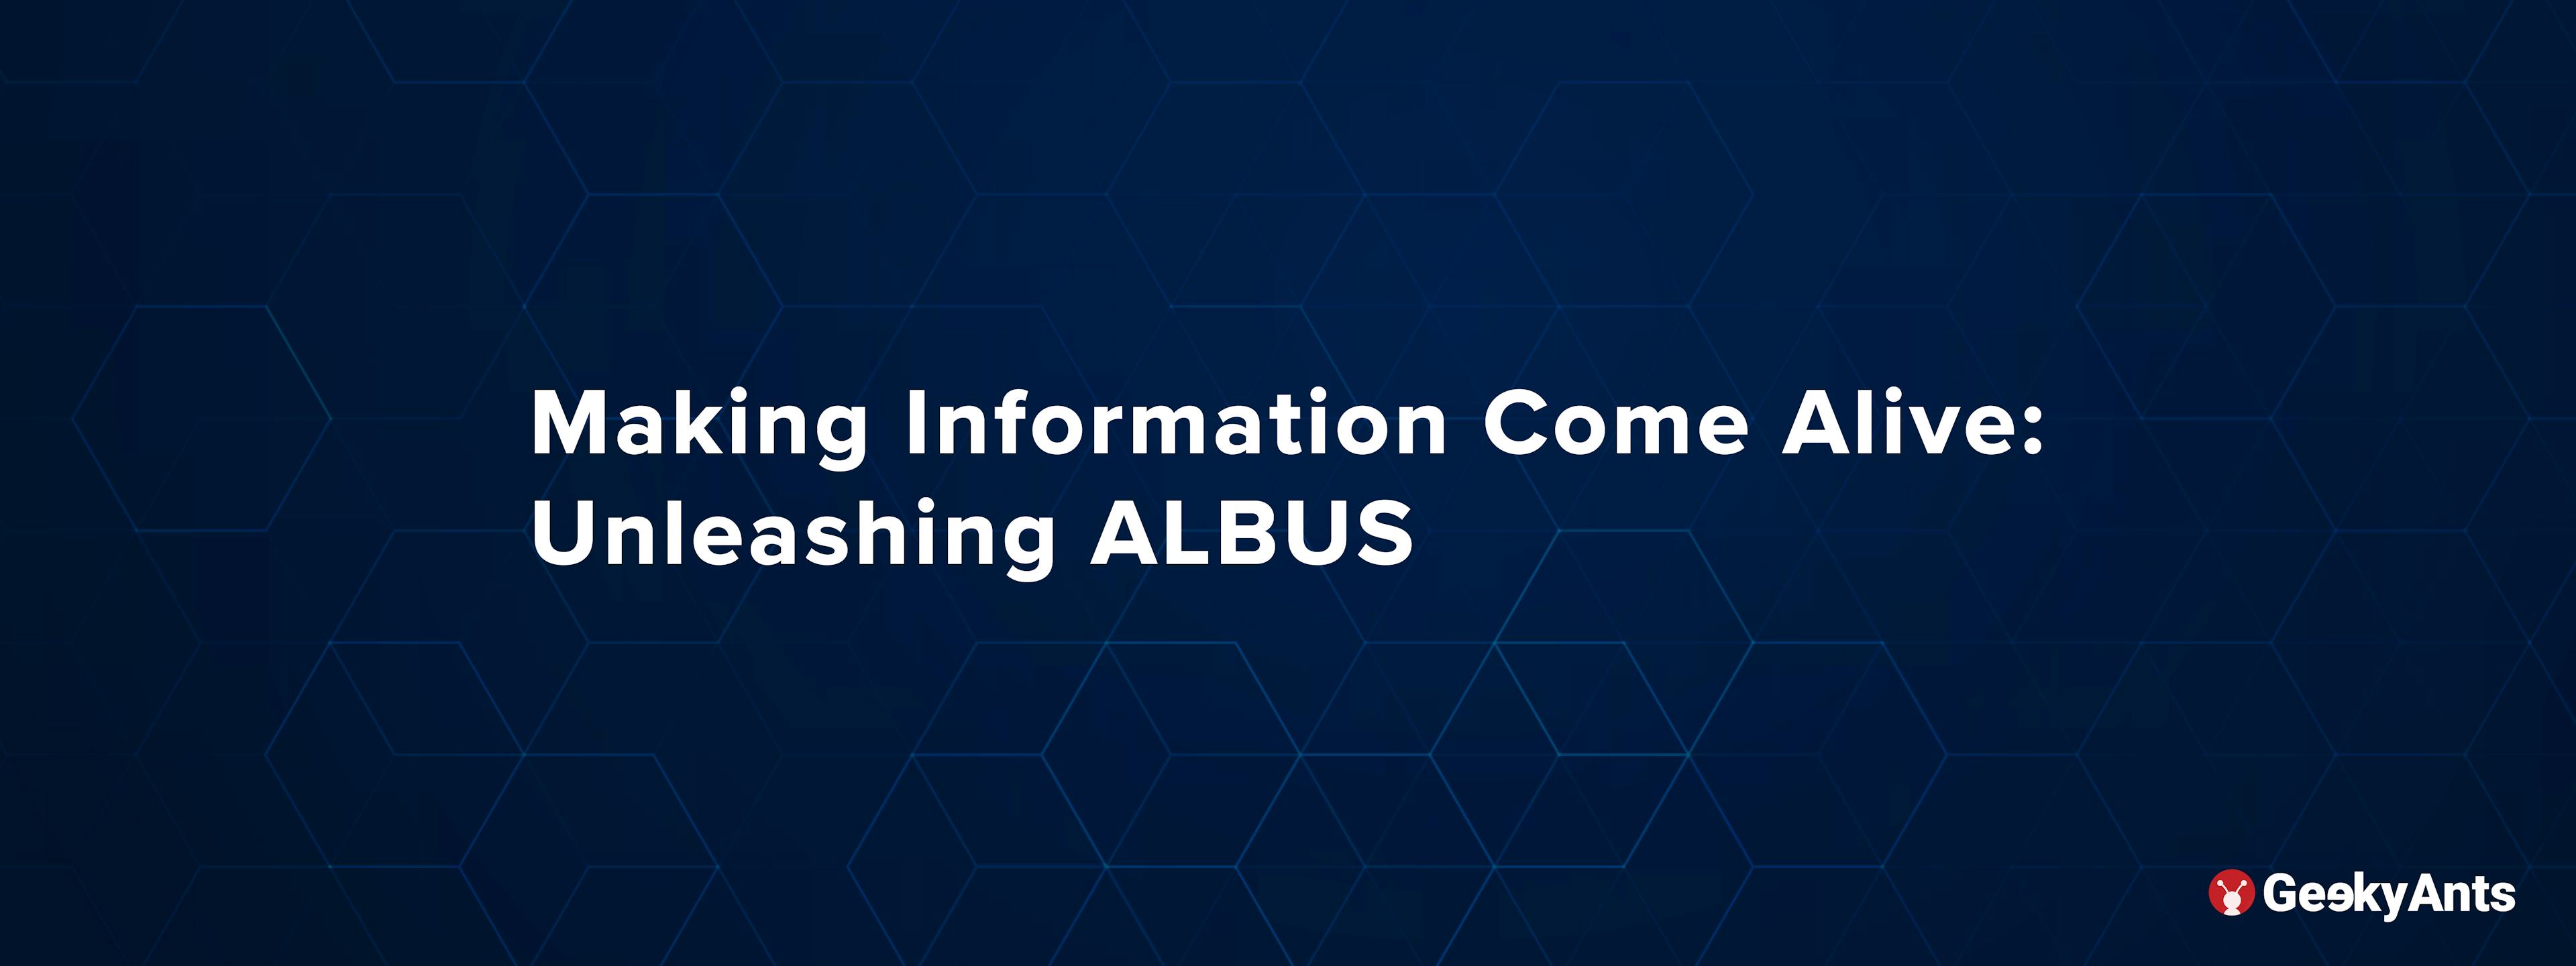 Making Information Come Alive: Unleashing ALBUS